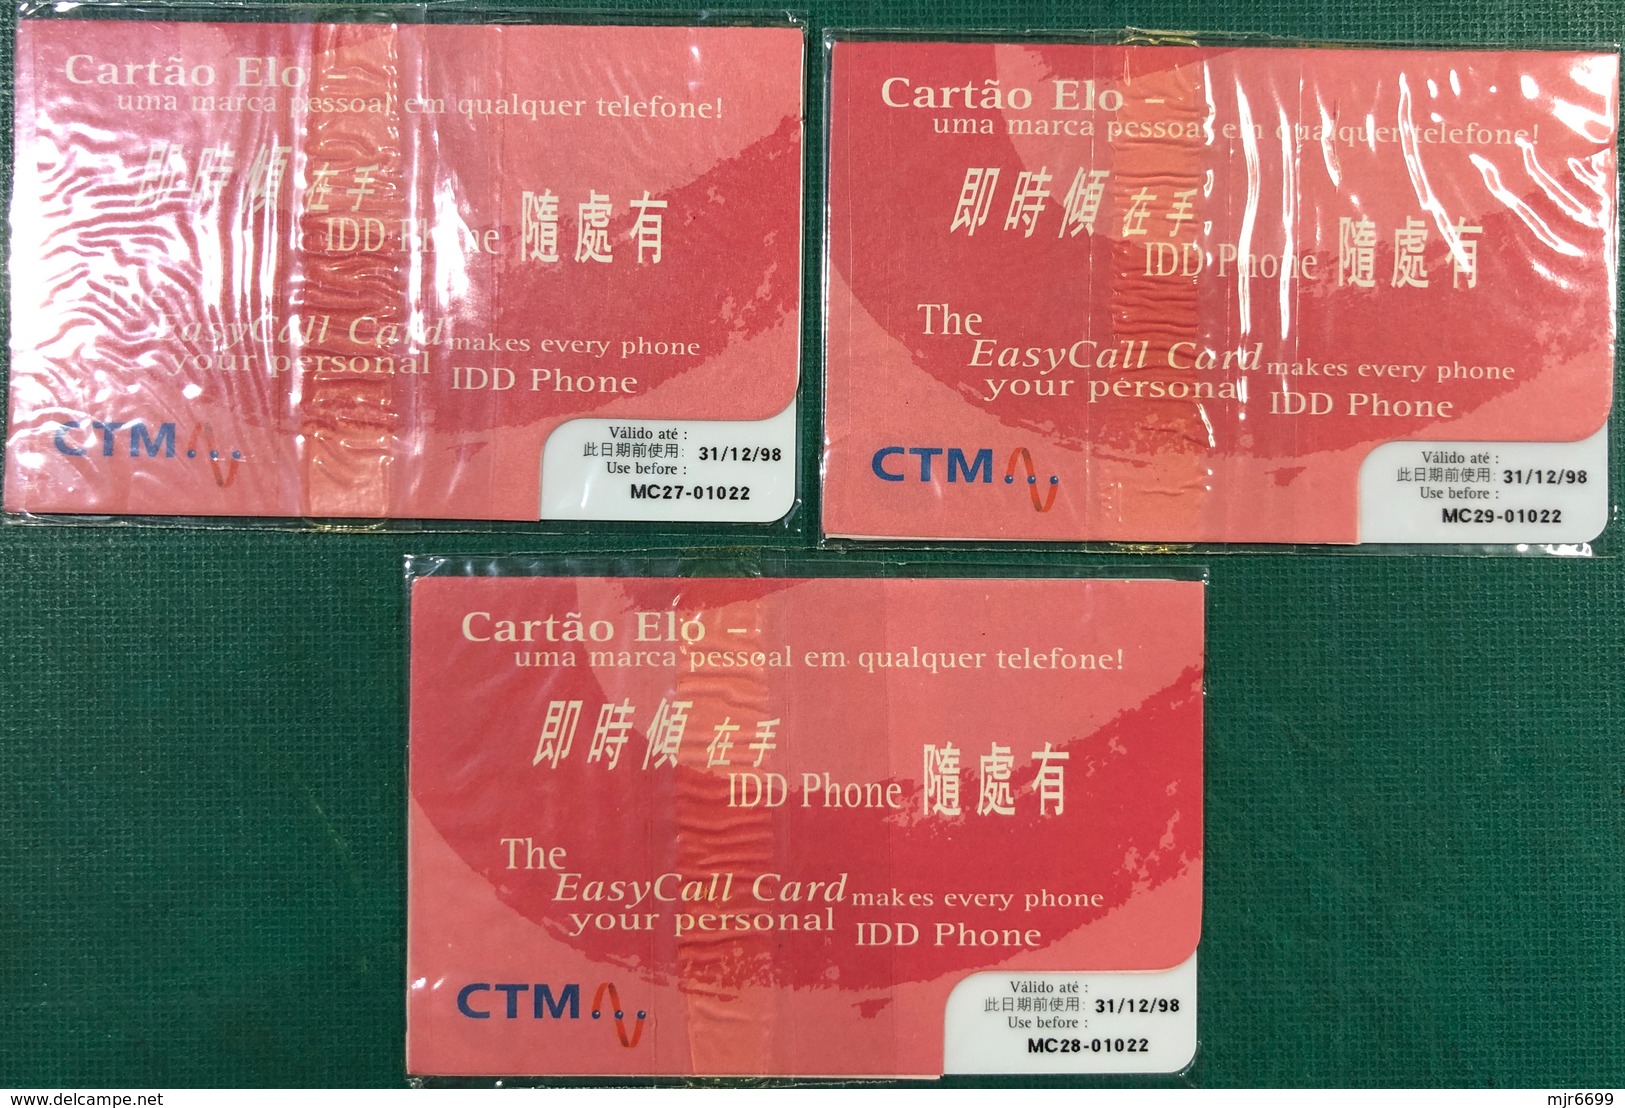 MACAU 1996\97 THE CHARMS OF MACAU SPECIAL PHONE CARDS, 1ST SET OF 3 UNUSED CARDS, VERY FINE AND RARE - Macao